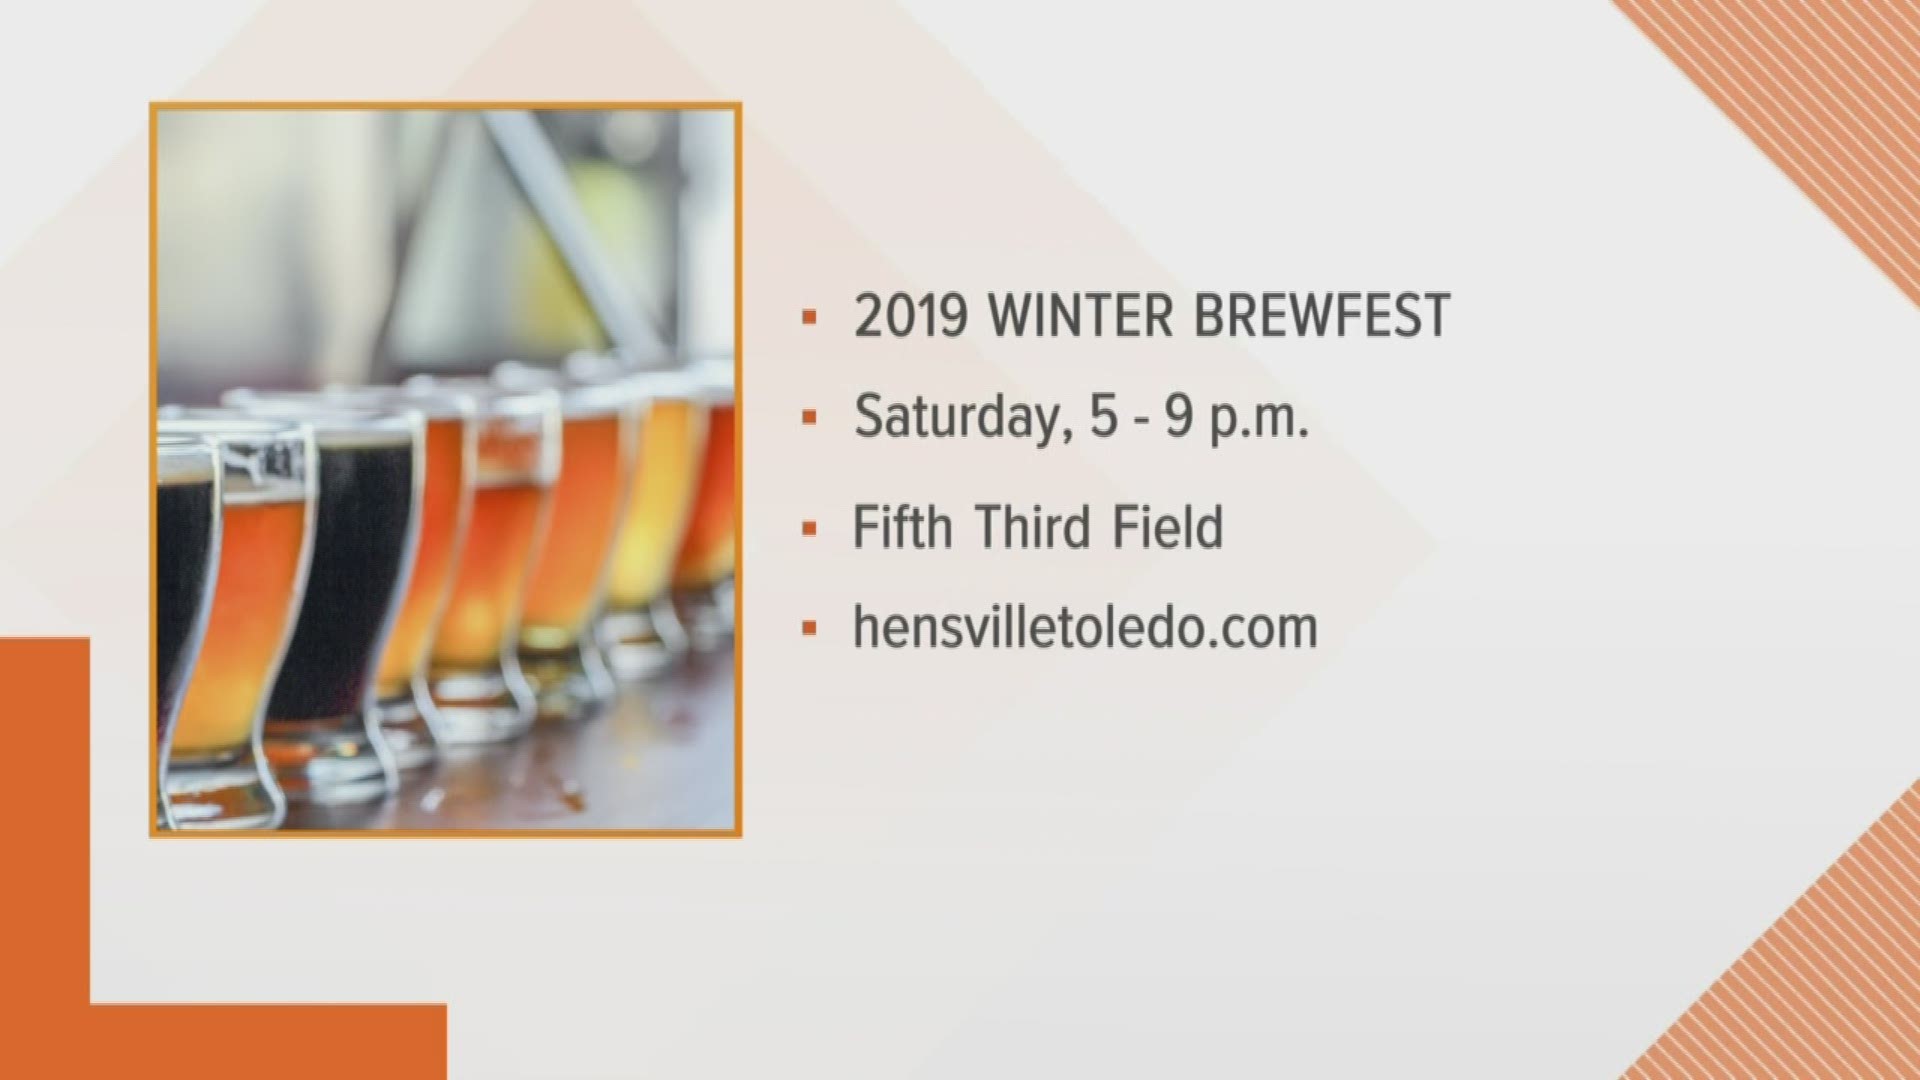 Even though it's cold outside, there's always something going on at Fifth Third Field - like the 2019 Winter Brewfest!